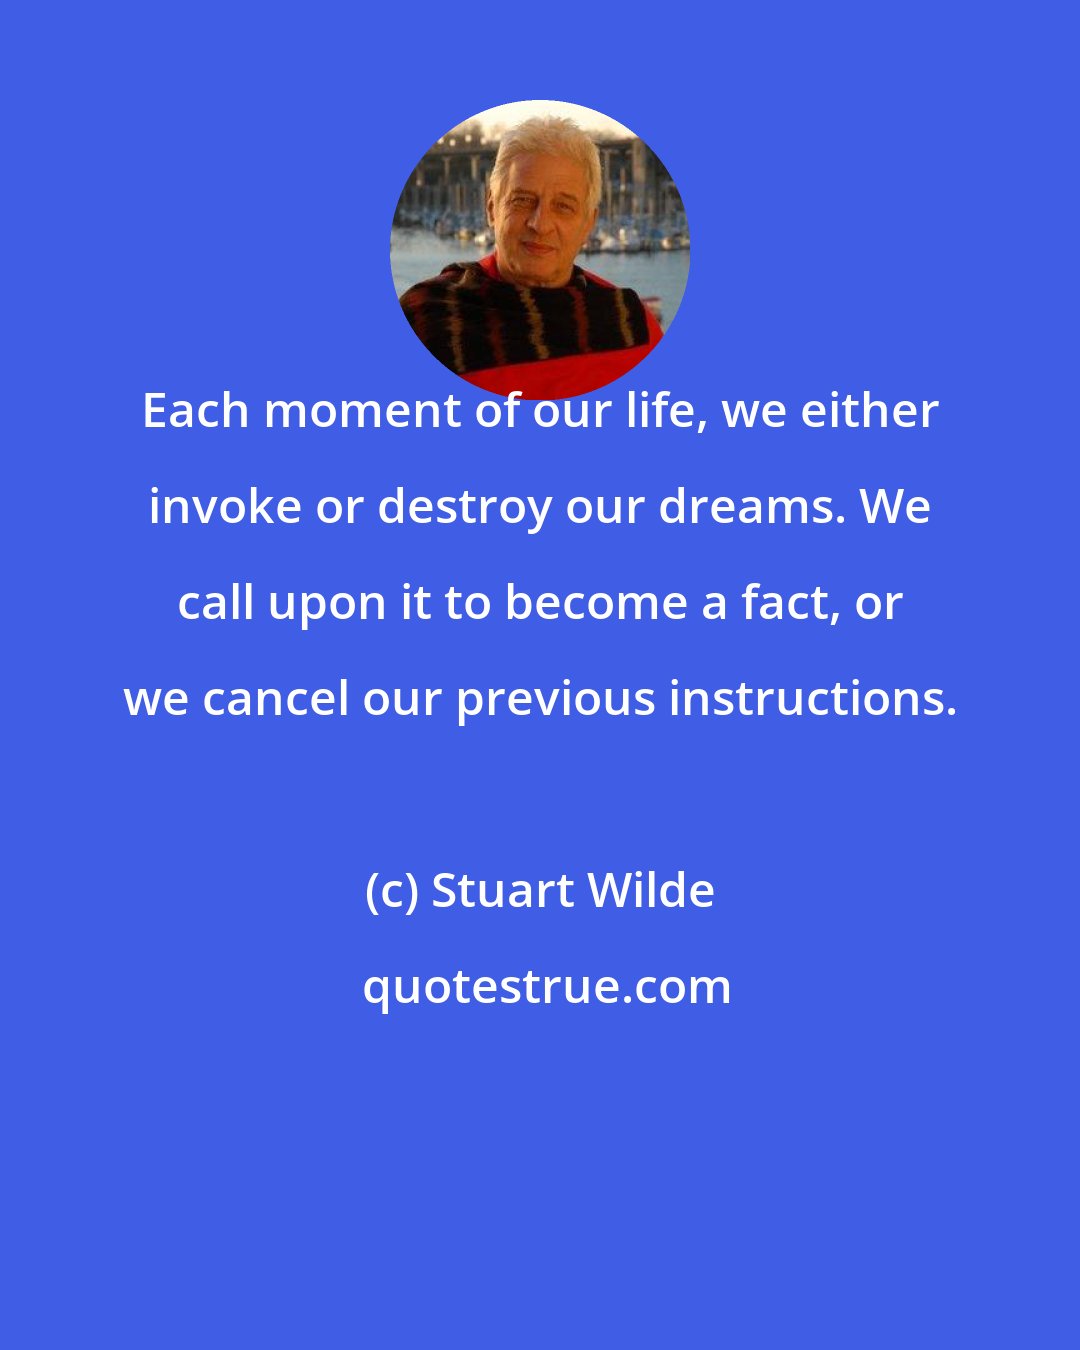 Stuart Wilde: Each moment of our life, we either invoke or destroy our dreams. We call upon it to become a fact, or we cancel our previous instructions.